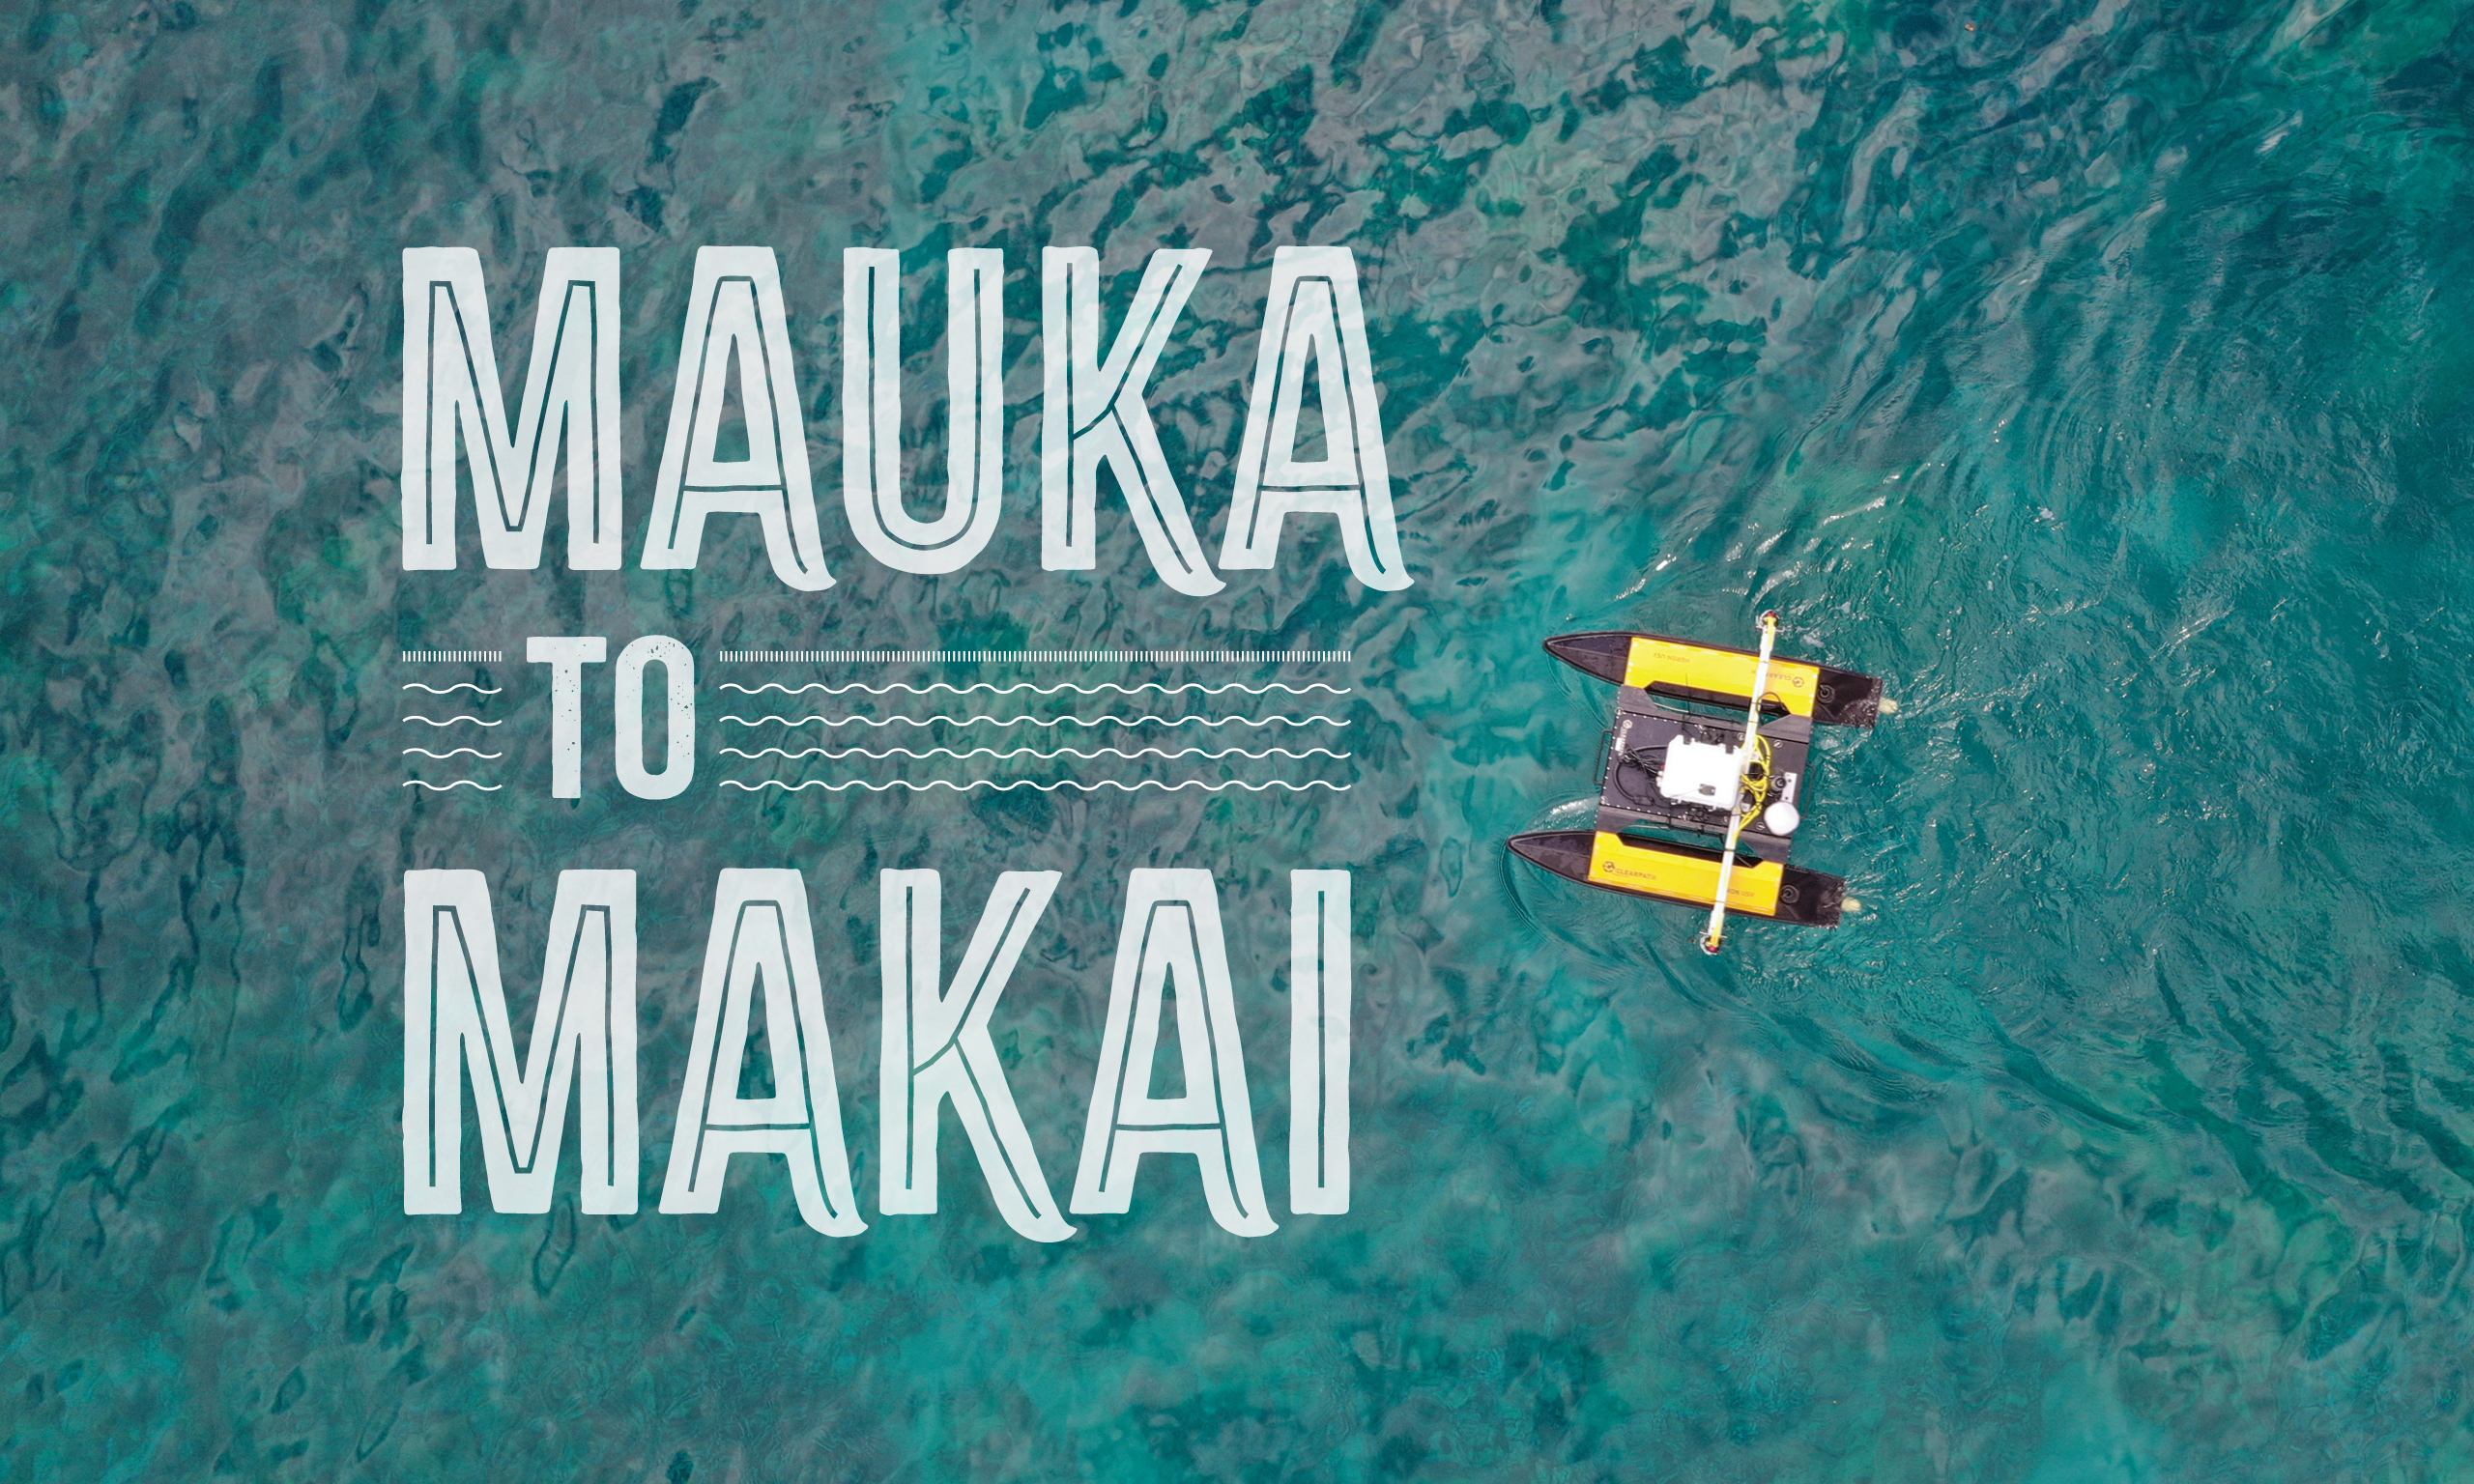 Article title: "Mauka to Makai" over water with a yellow autonomous aquatic drone.